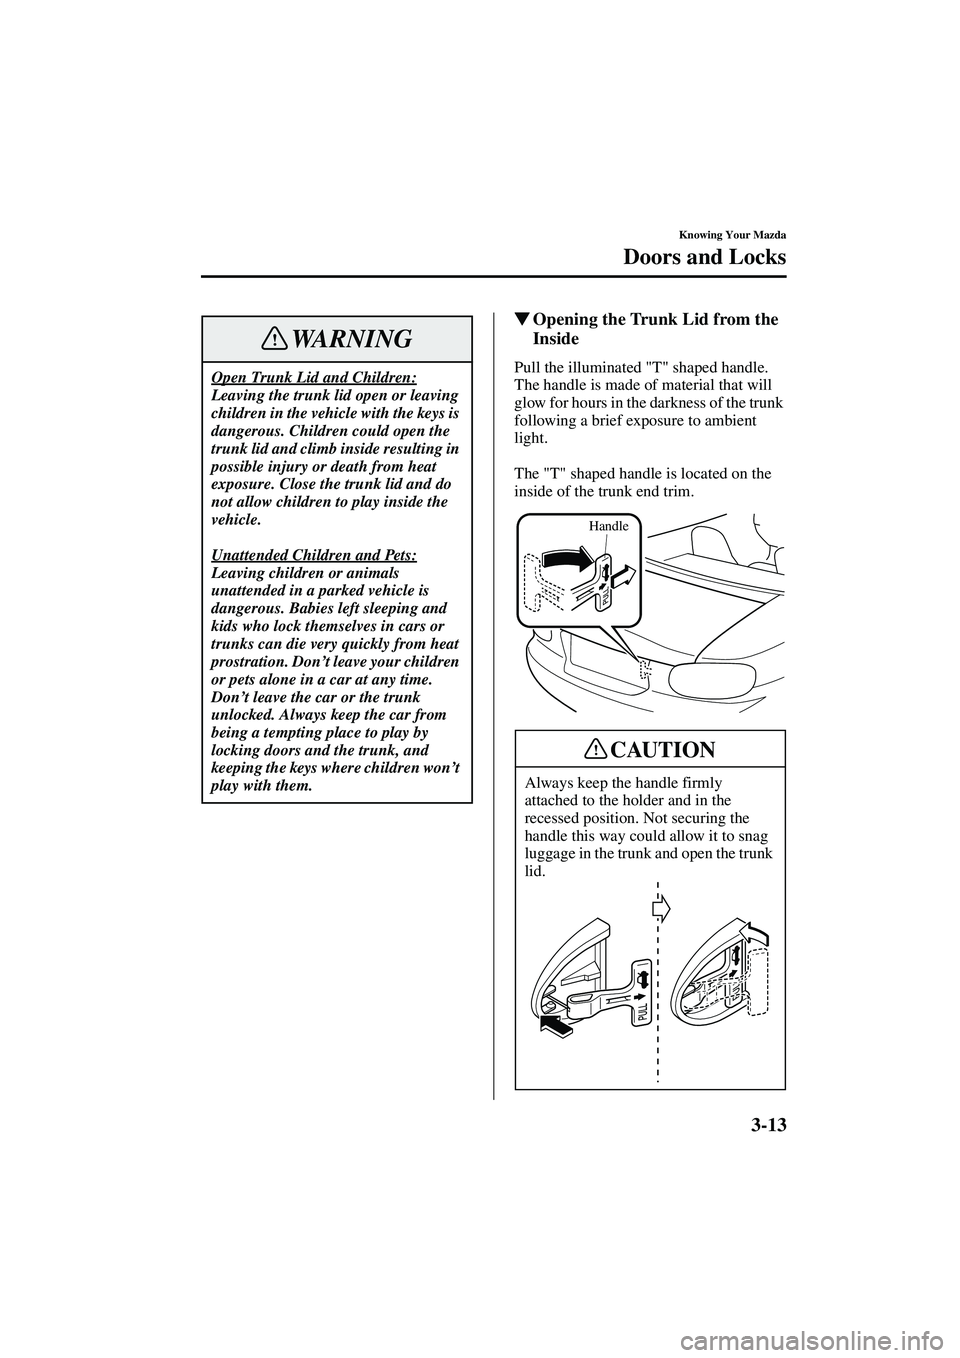 MAZDA MODEL MX-5 MIATA 2004  Owners Manual 3-13
Knowing Your Mazda
Doors and Locks
Form No. 8S15-EA-03G
Opening the Trunk Lid from the 
Inside
Pull the illuminated "T" shaped handle. 
The handle is made of material that will 
glow for hours i